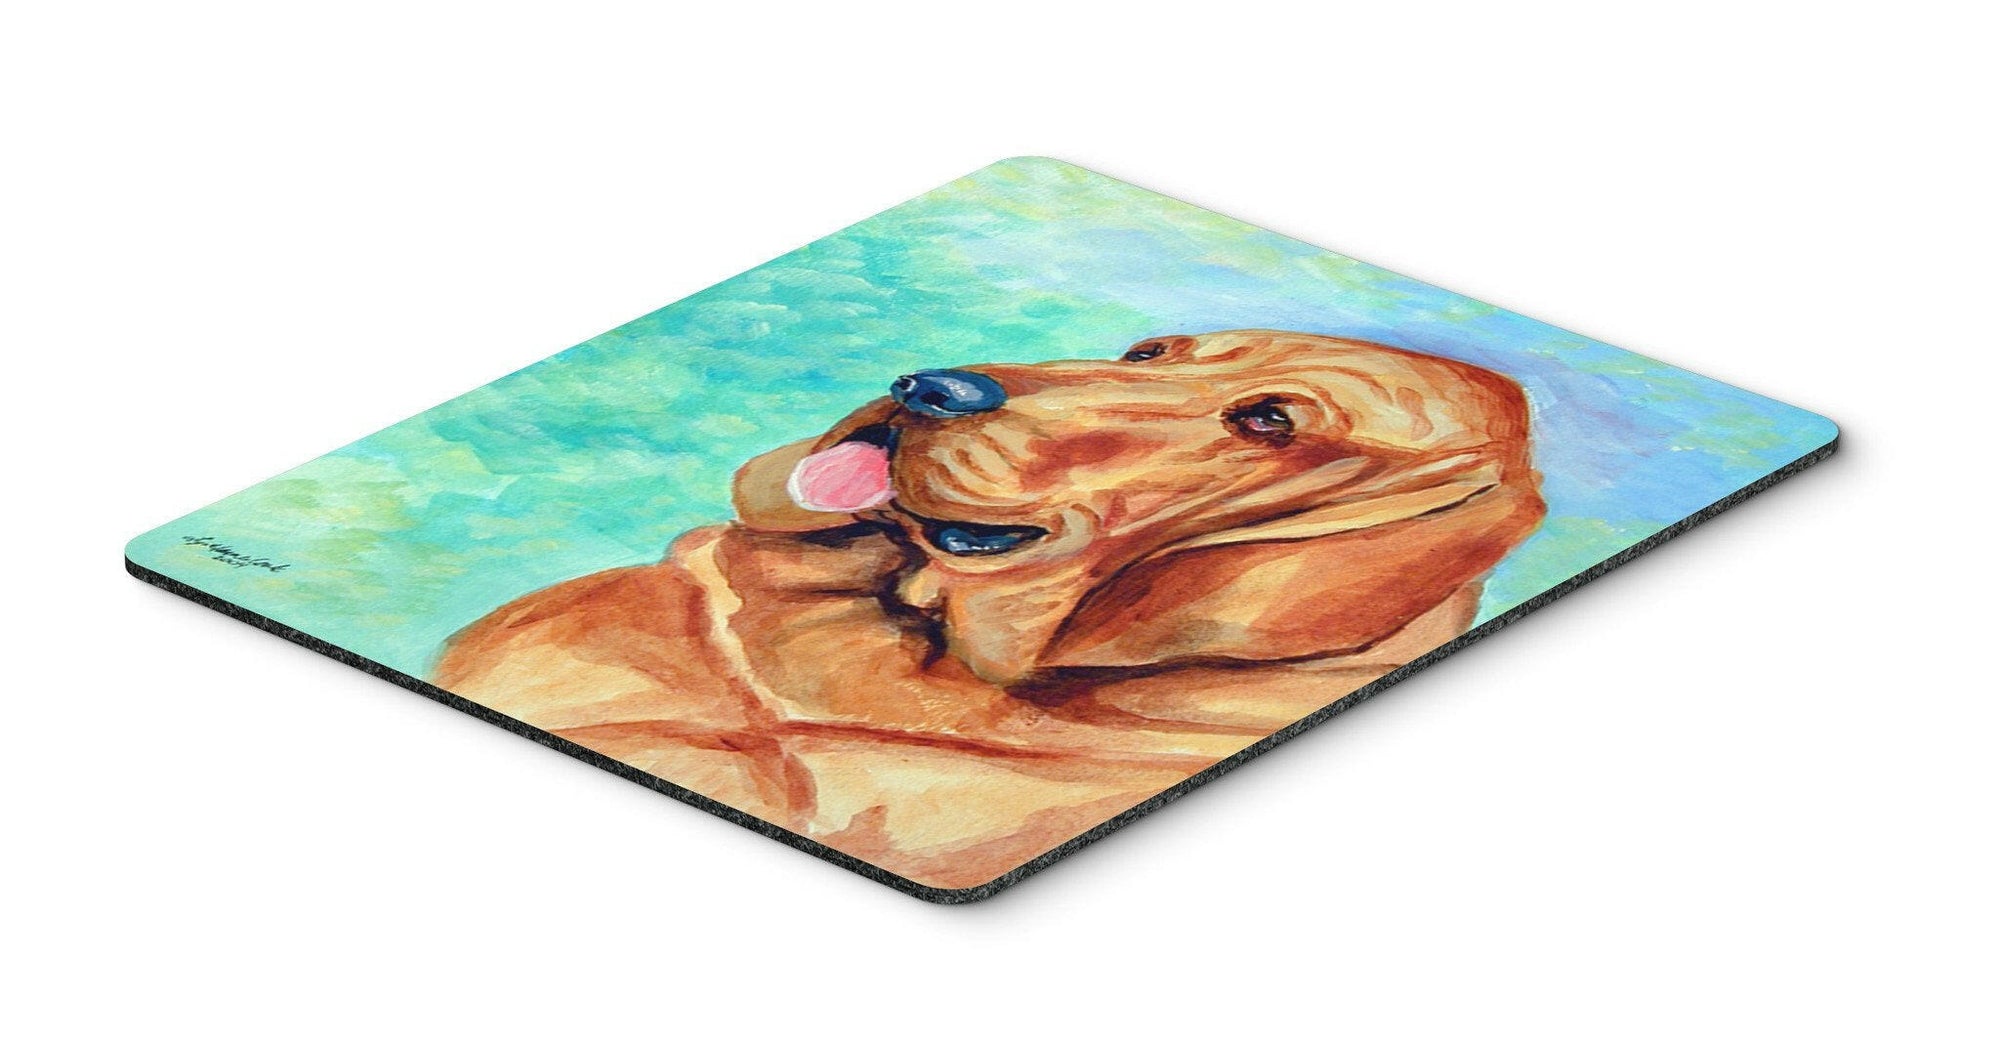 Bloodhound Mouse Pad / Hot Pad / Trivet by Caroline's Treasures